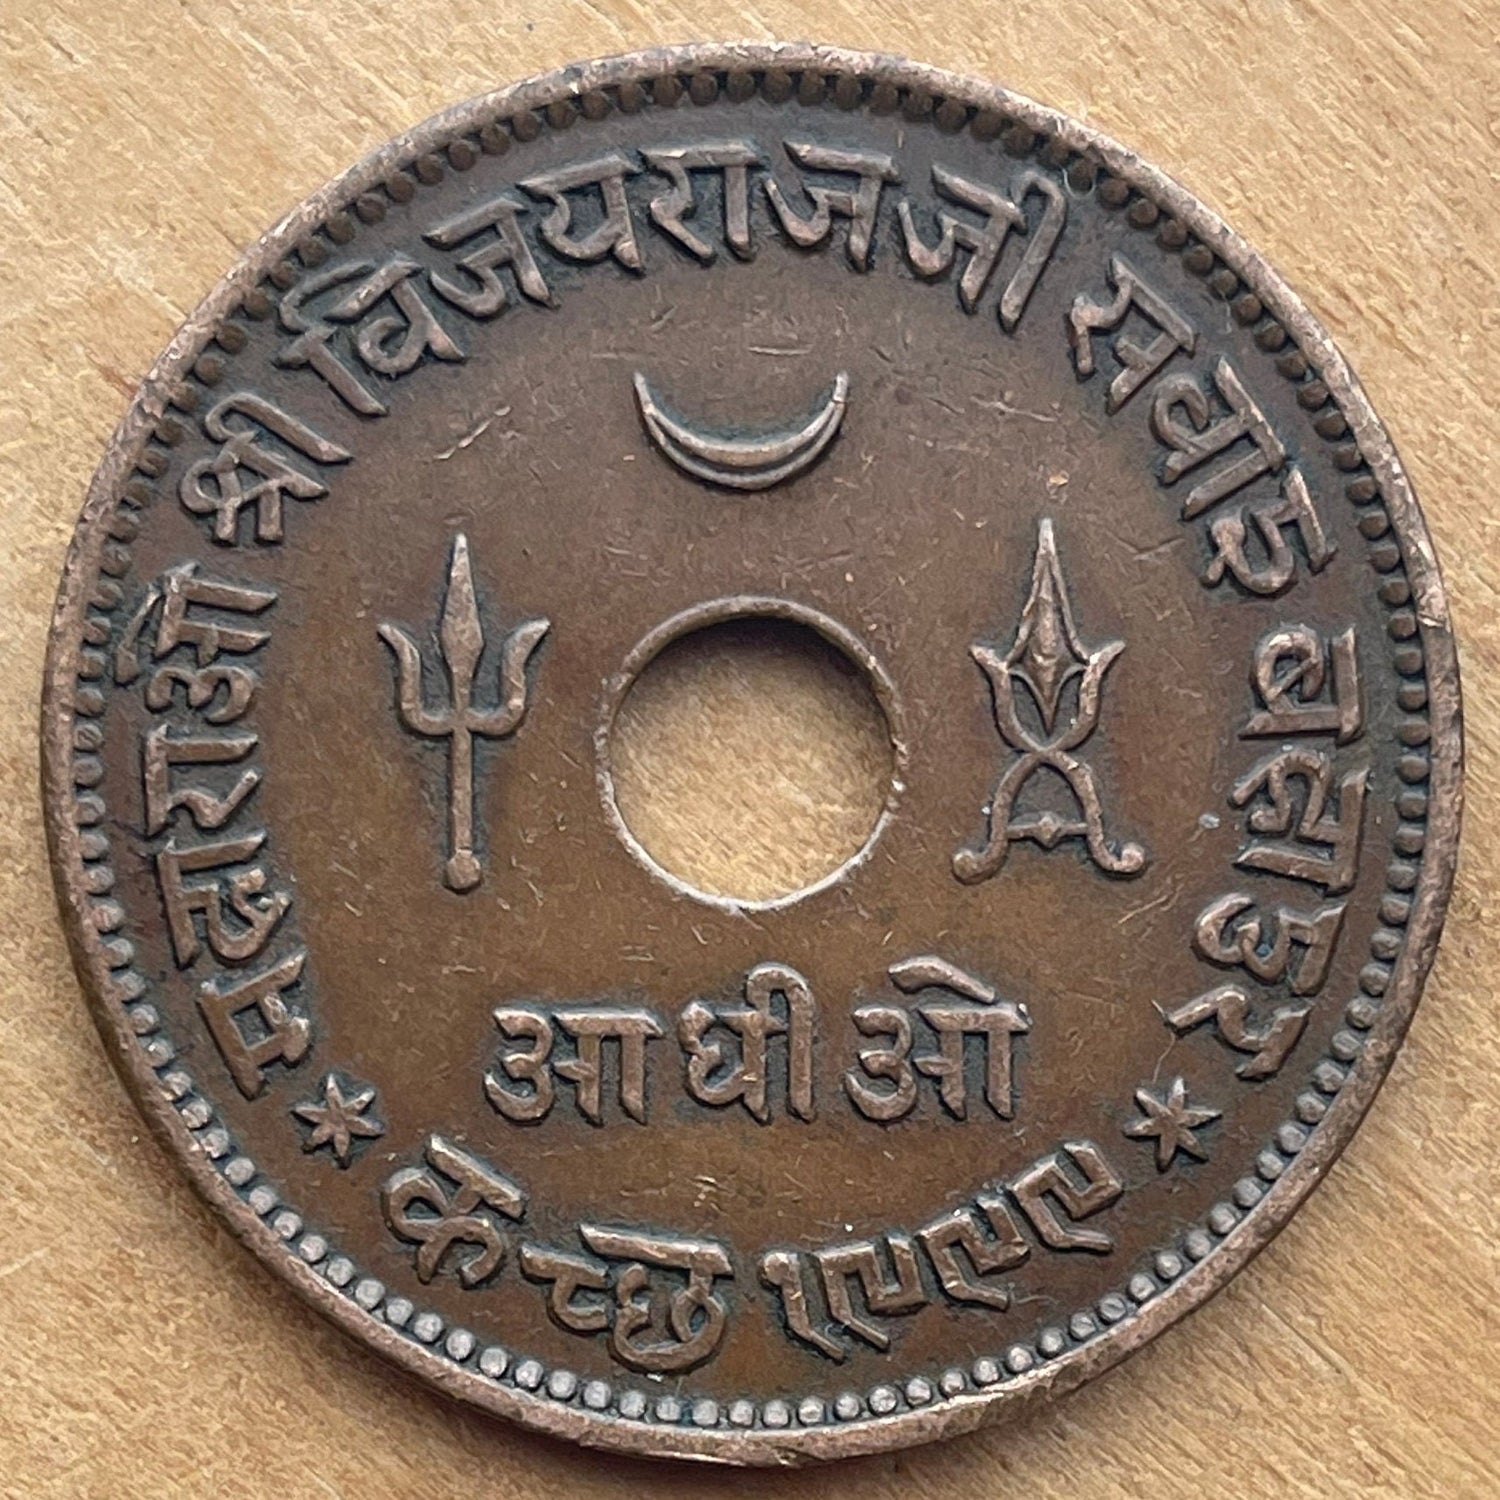 Trident Trishula, Lunar Crescent, Katar Dagger 1 Adhio India Princely State of Kutch Authentic Coin Money for Jewelry (Maharaja) (Hole Coin)